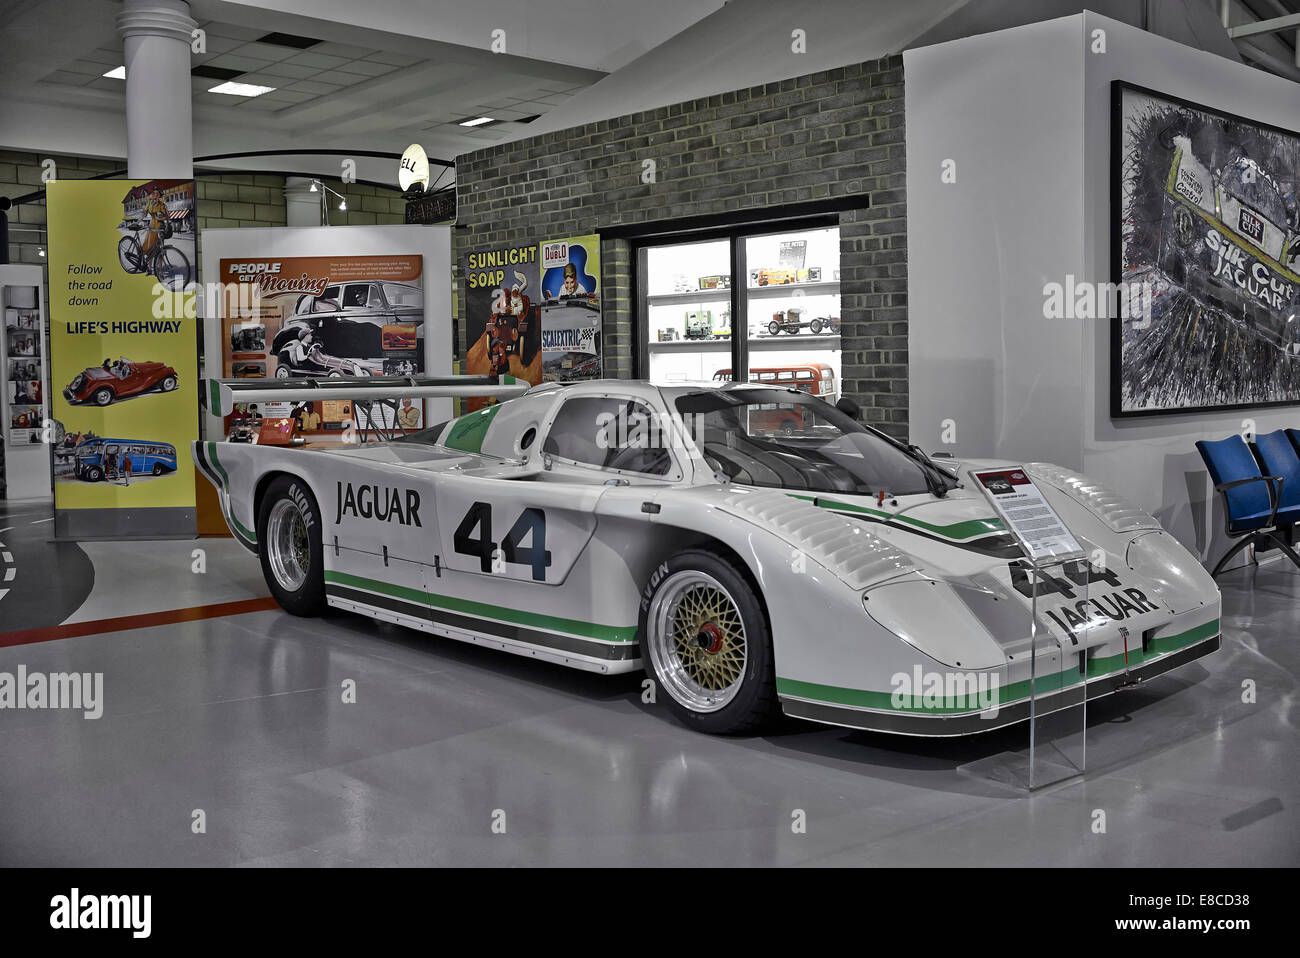 Jaguar XJR-5 1987 competition car on display at the Heritage Motor Museum Gaydon England UK Stock Photo